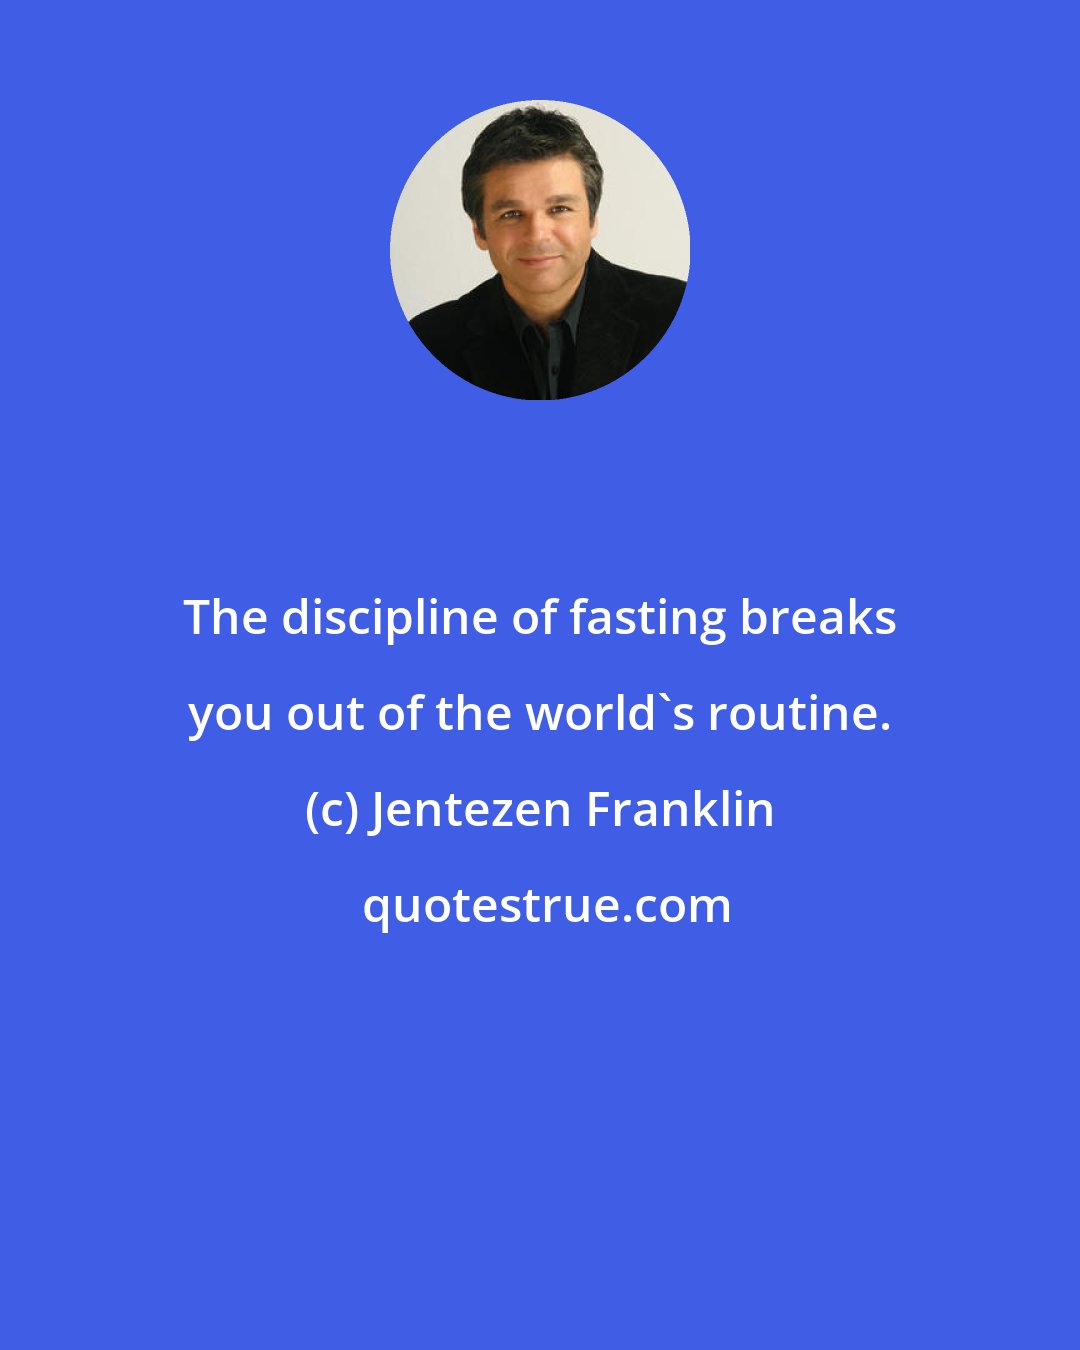 Jentezen Franklin: The discipline of fasting breaks you out of the world's routine.